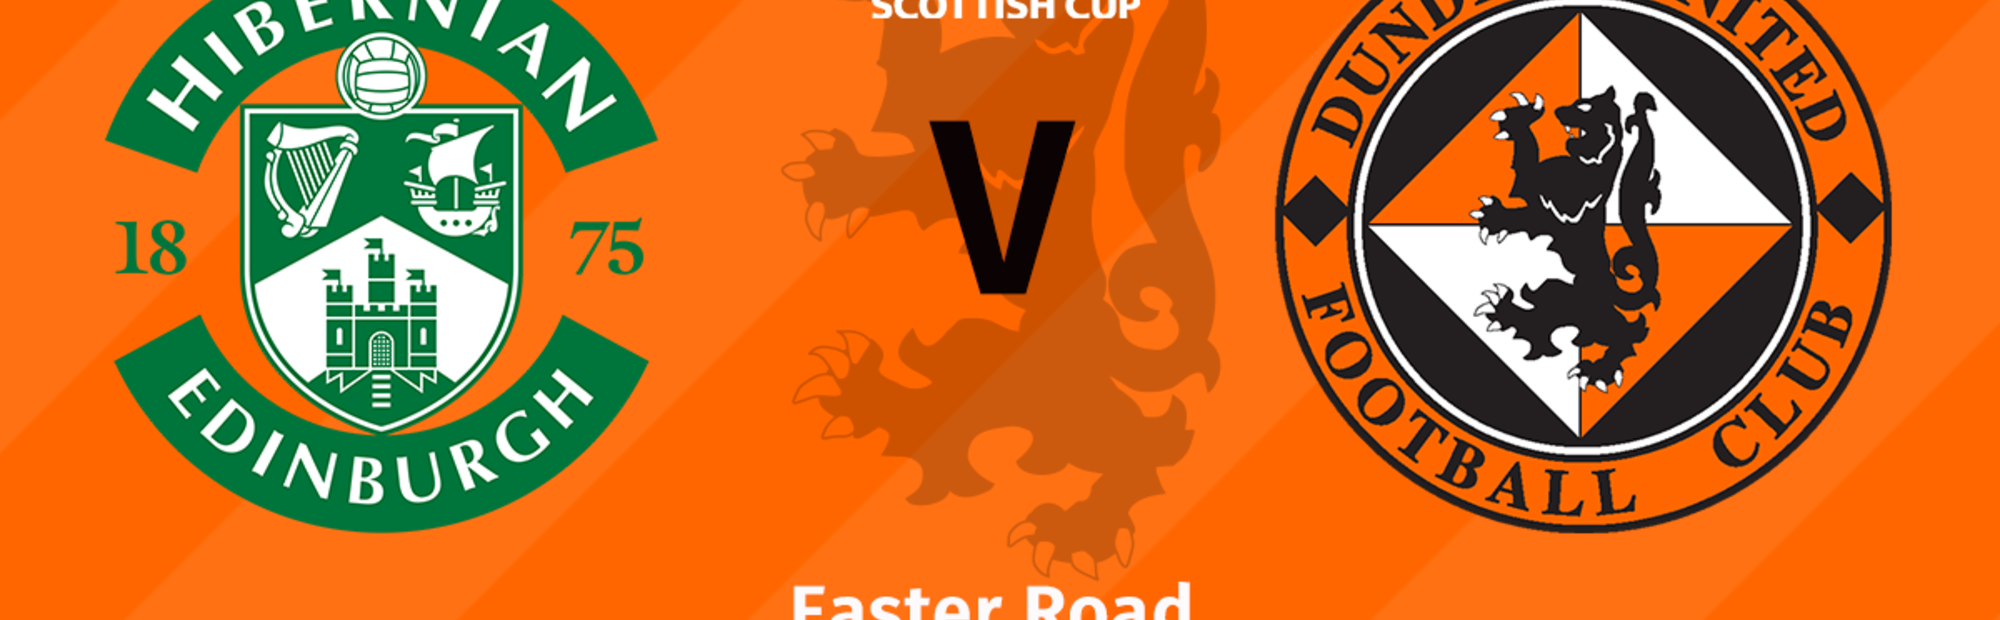 Tomorrow we make the trip to the capital for our Scottish Cup 4th Round replay